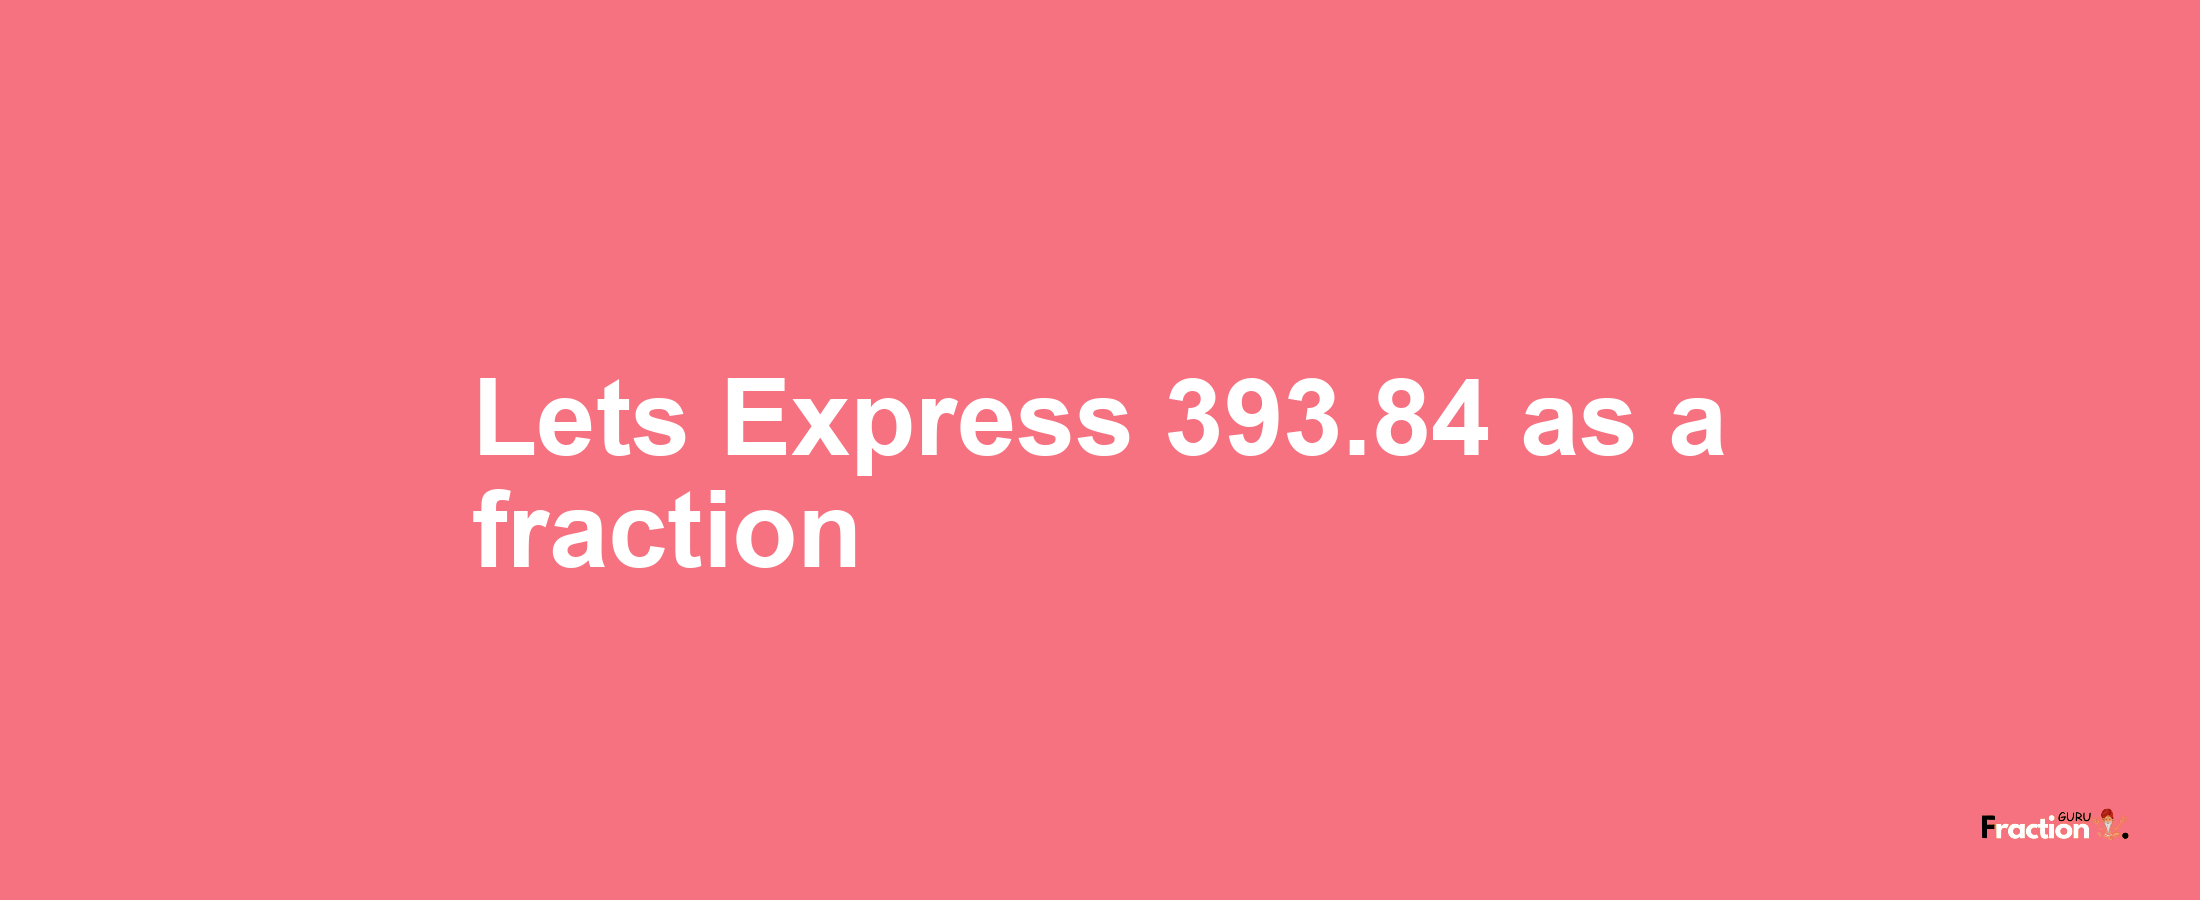 Lets Express 393.84 as afraction